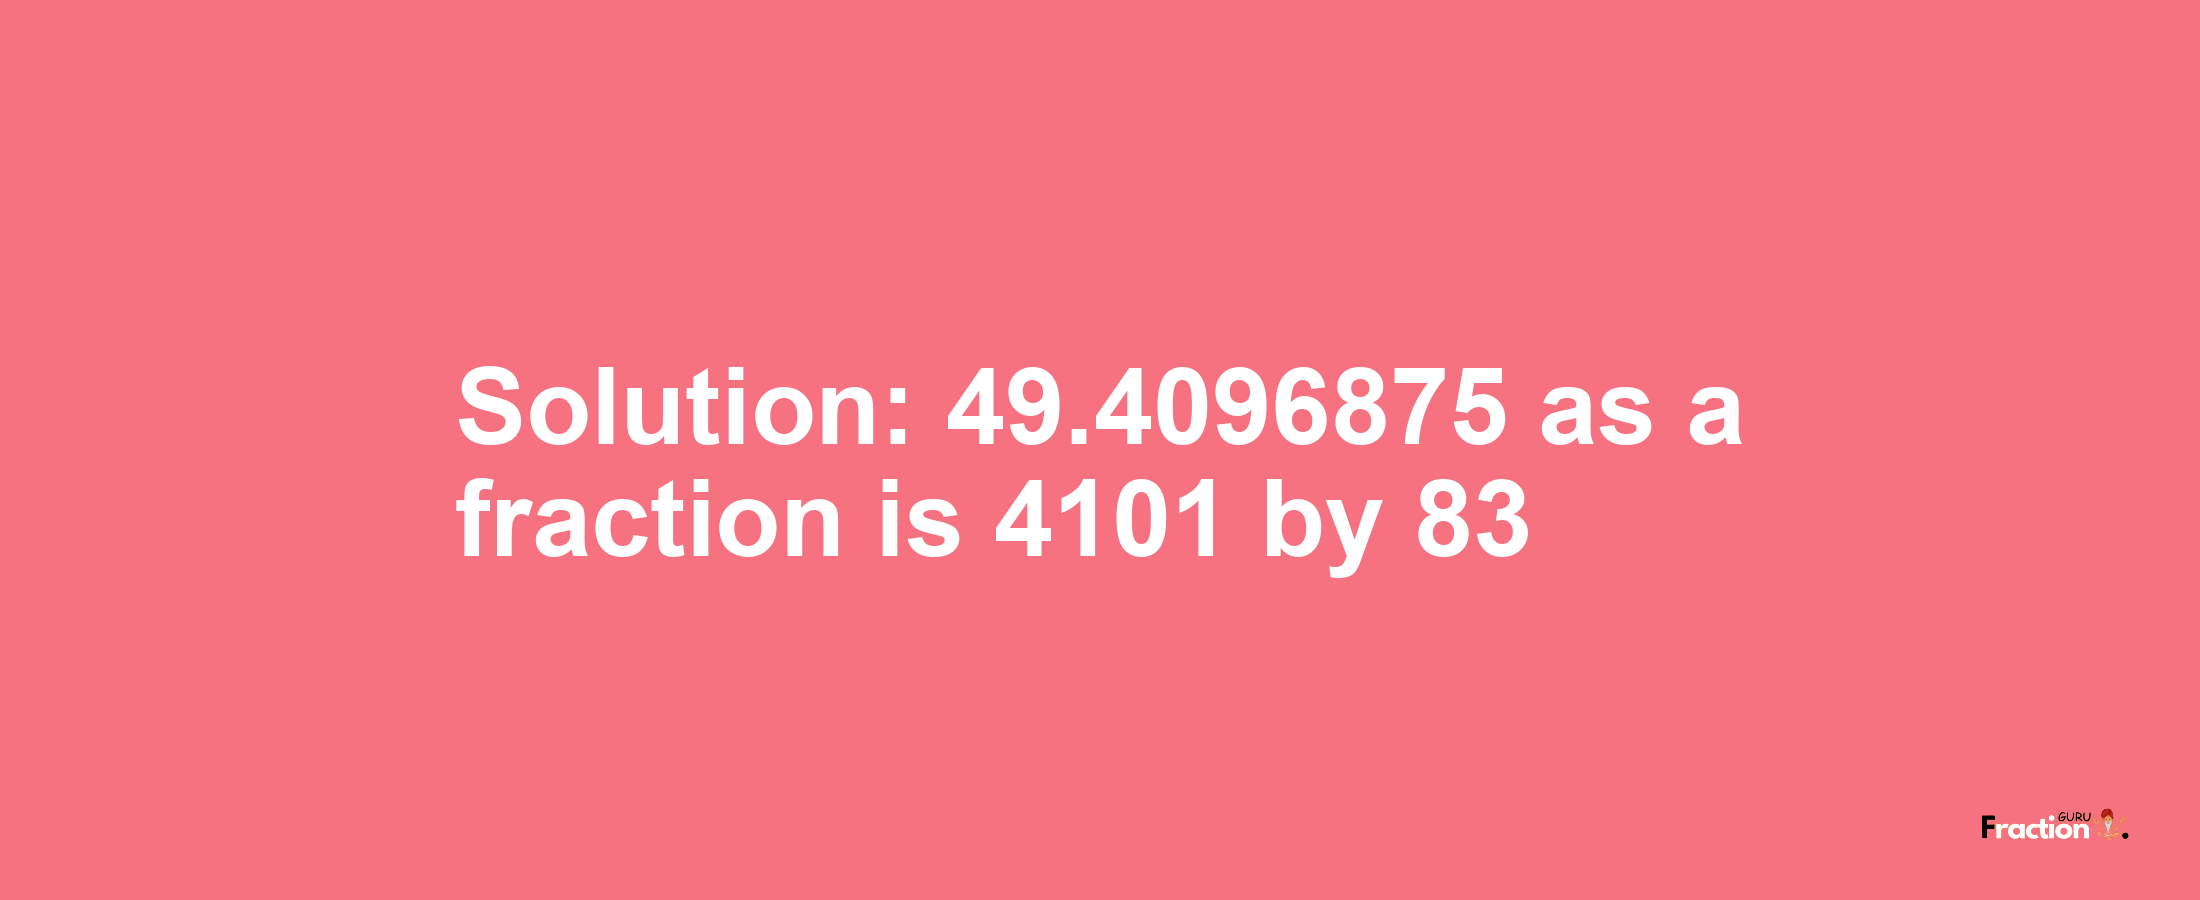 Solution:49.4096875 as a fraction is 4101/83